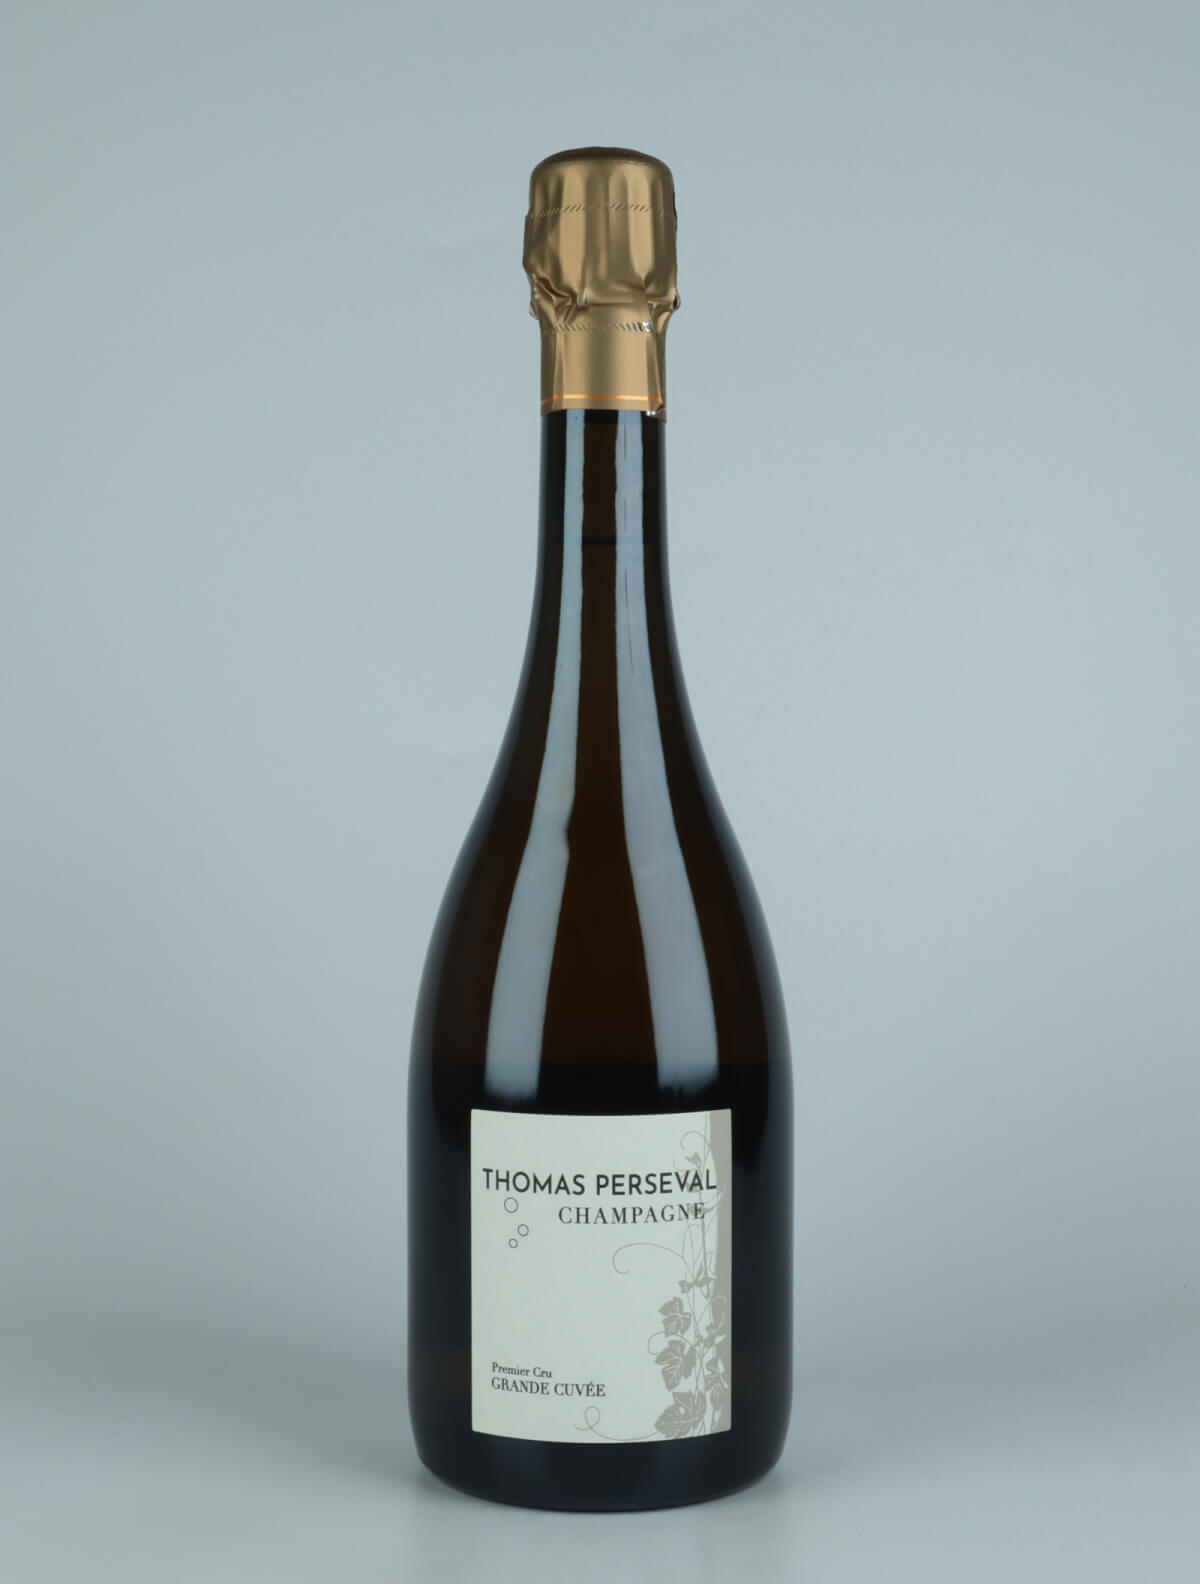 A bottle 2013 Chamery 1. Cru - Grande Cuvée Sparkling from Thomas Perseval, Champagne in France